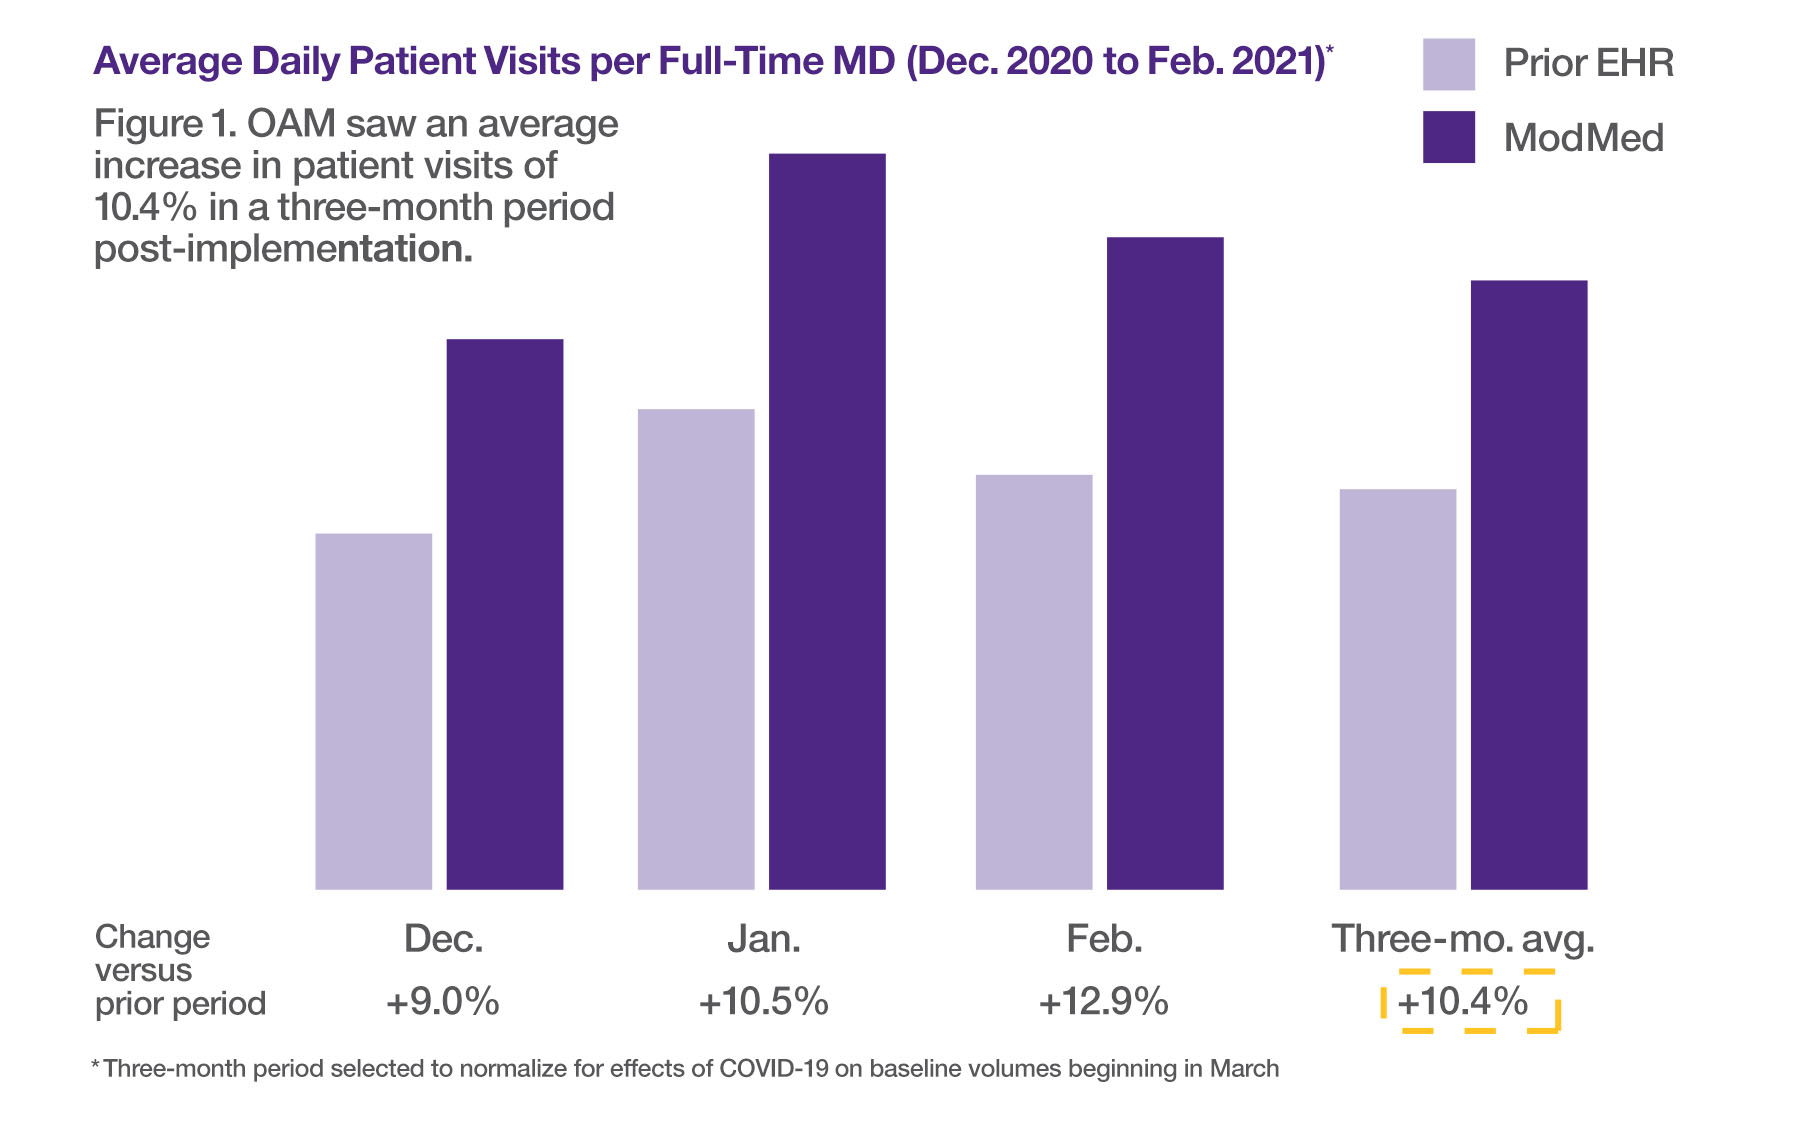 Graph of average daily patient visits per full-time MD, December 2020 to February 2021